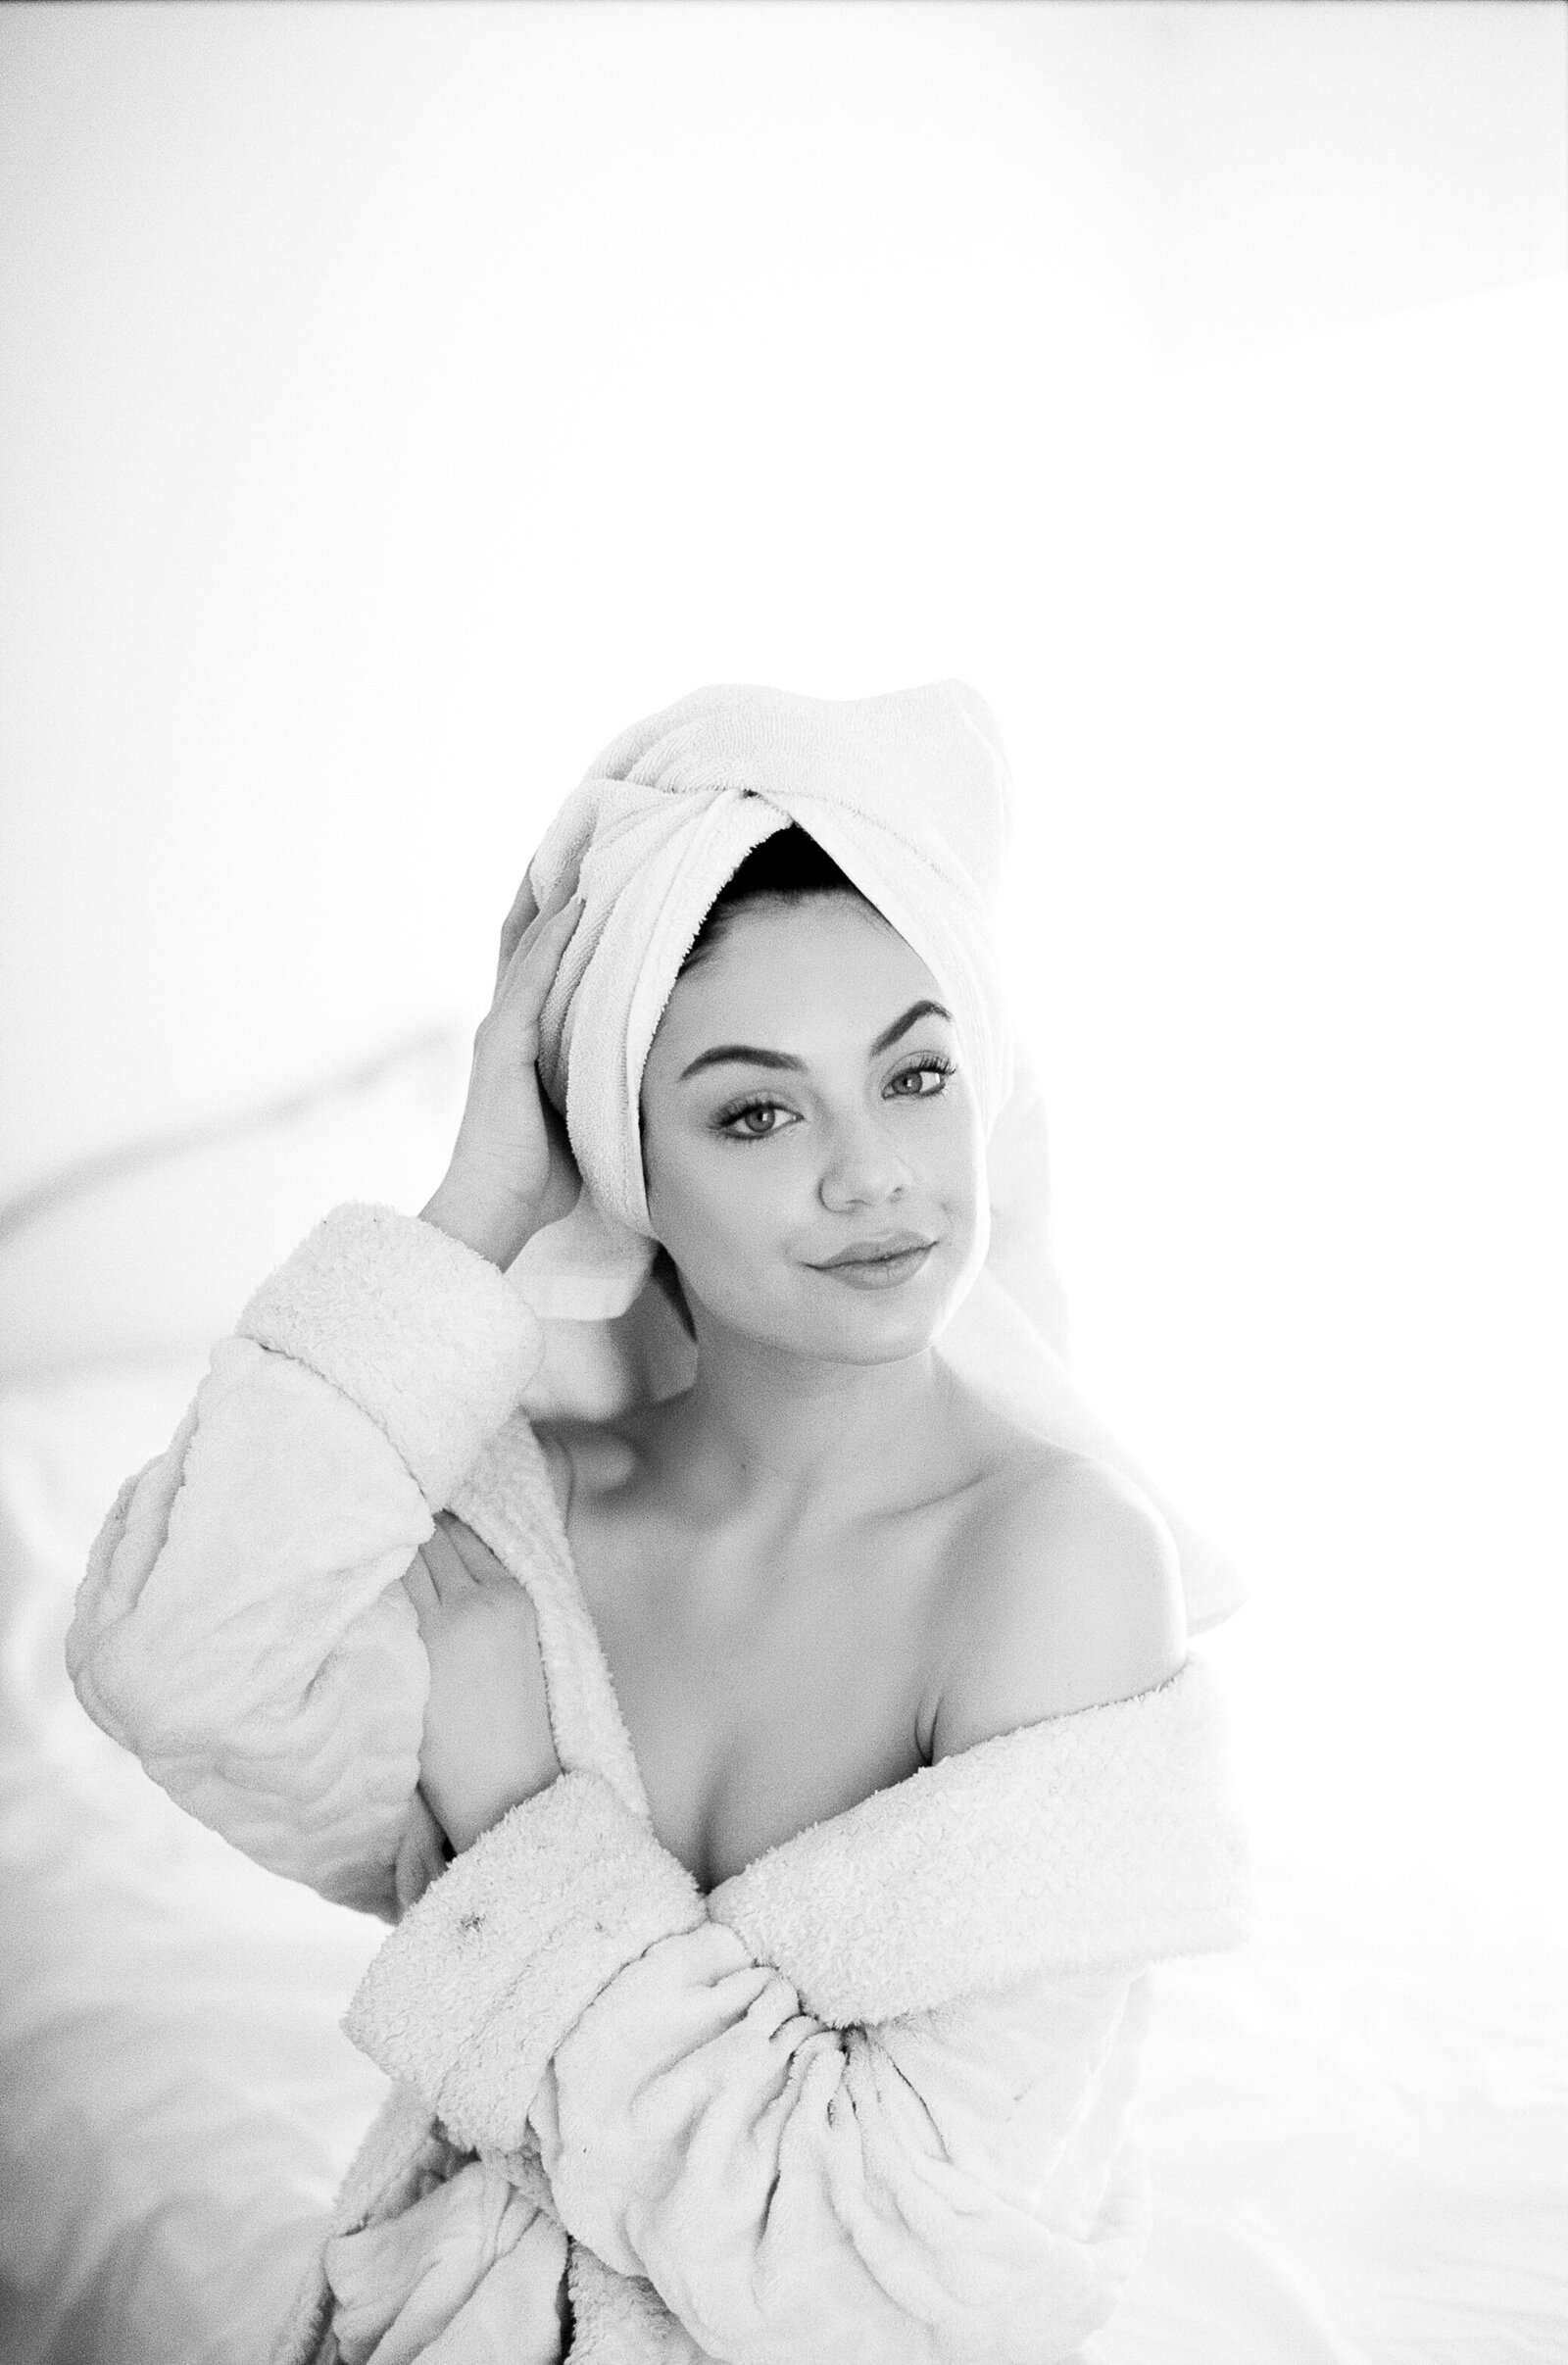 Black and white boudoir photo of woman wearing bathrobe and towel on head